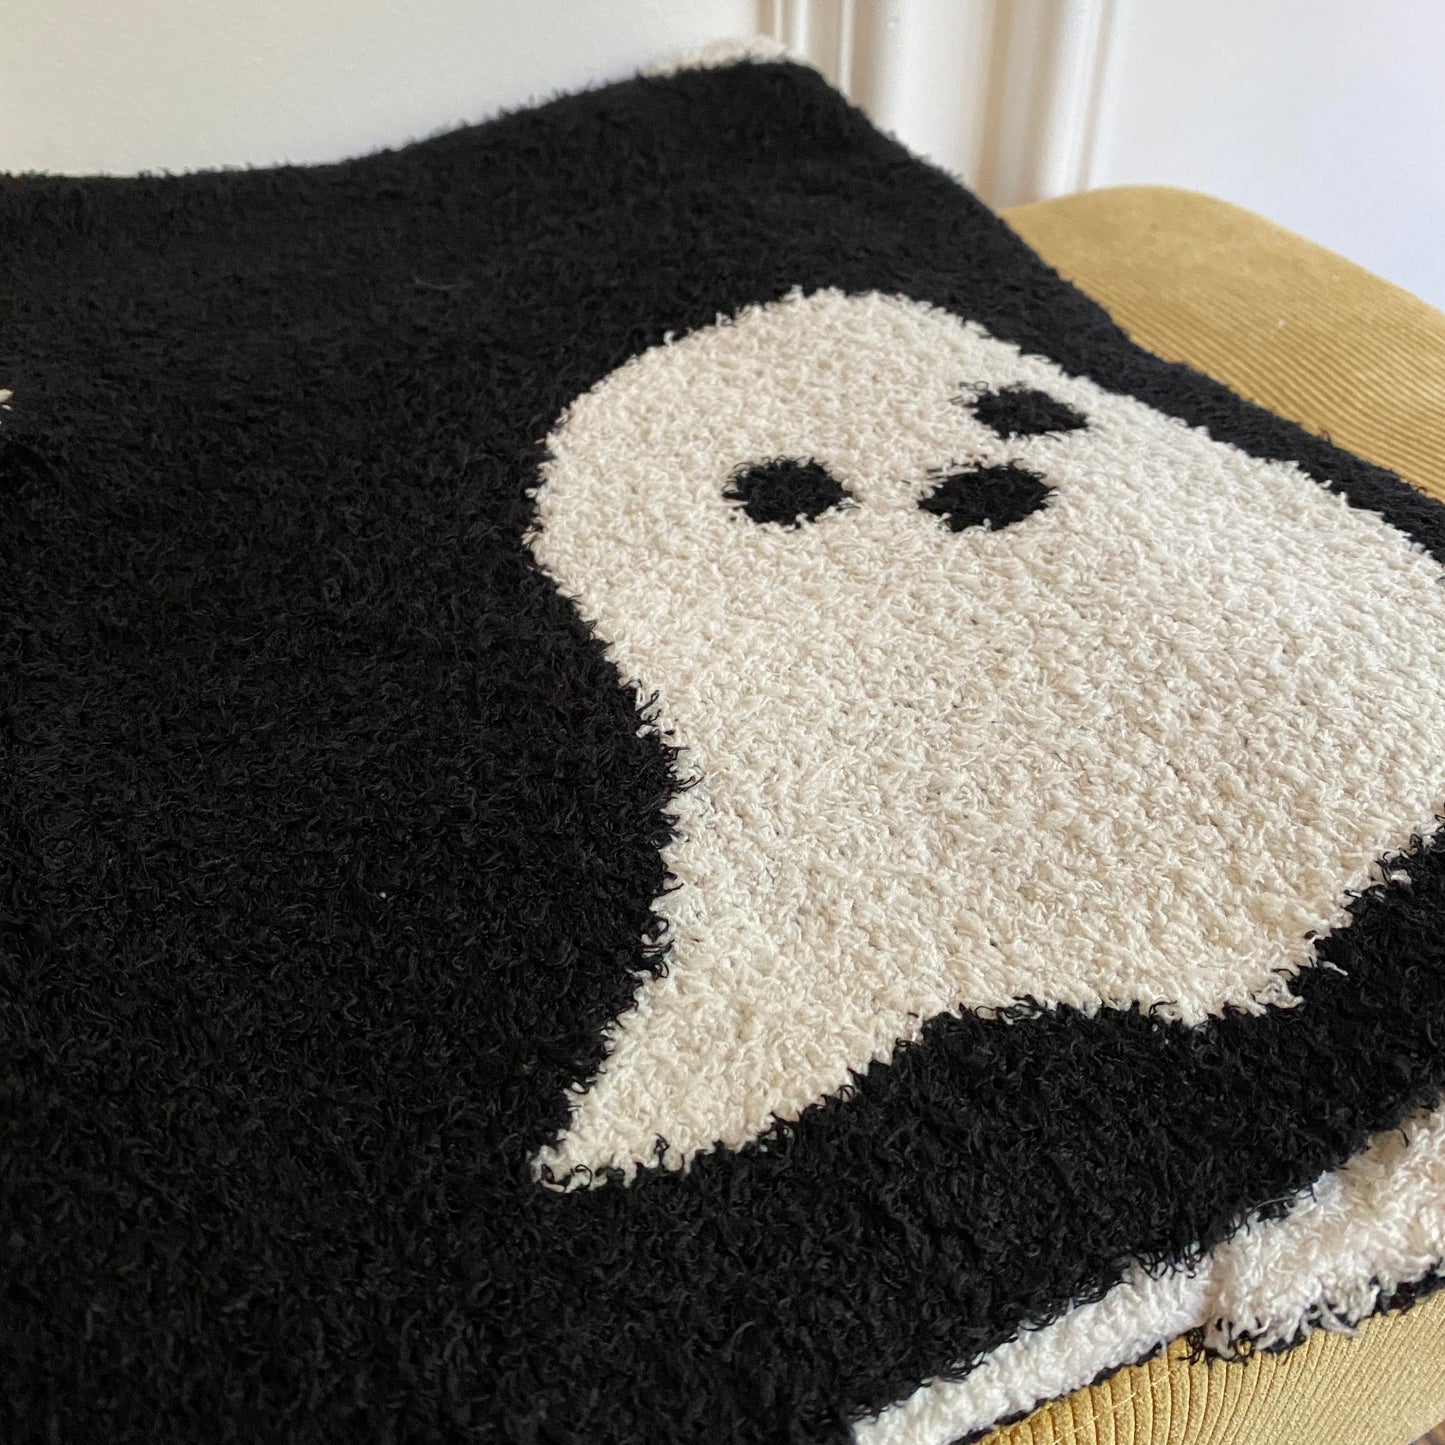 Blanket - Soft Dreams - Double Sided Ghost Black & White - PREORDER 6/24-6/27